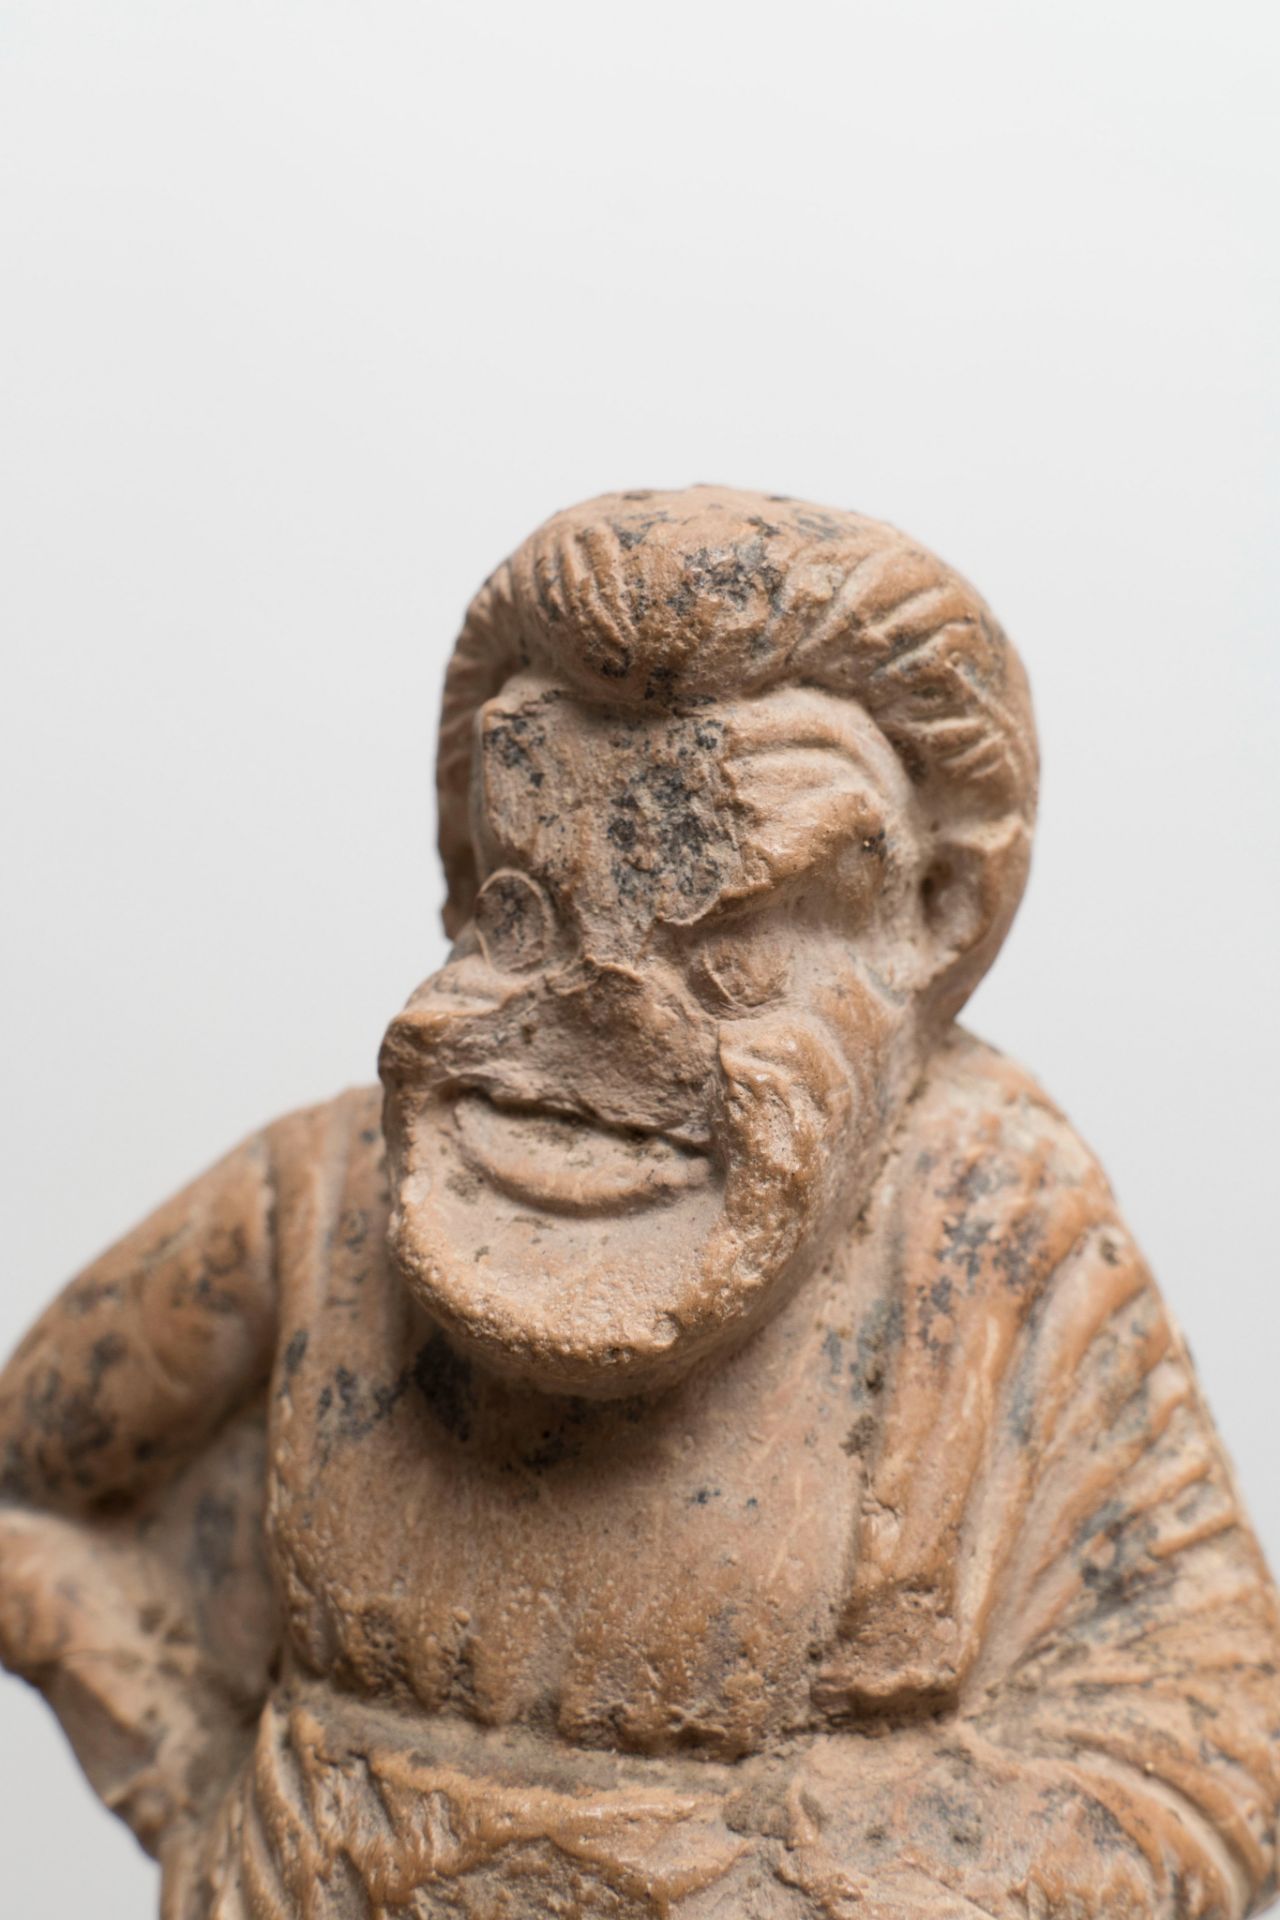 An antique terracotta figurine of a comic actor, Greece, ca. 350 B.C., H 15,2 cm - Image 5 of 7